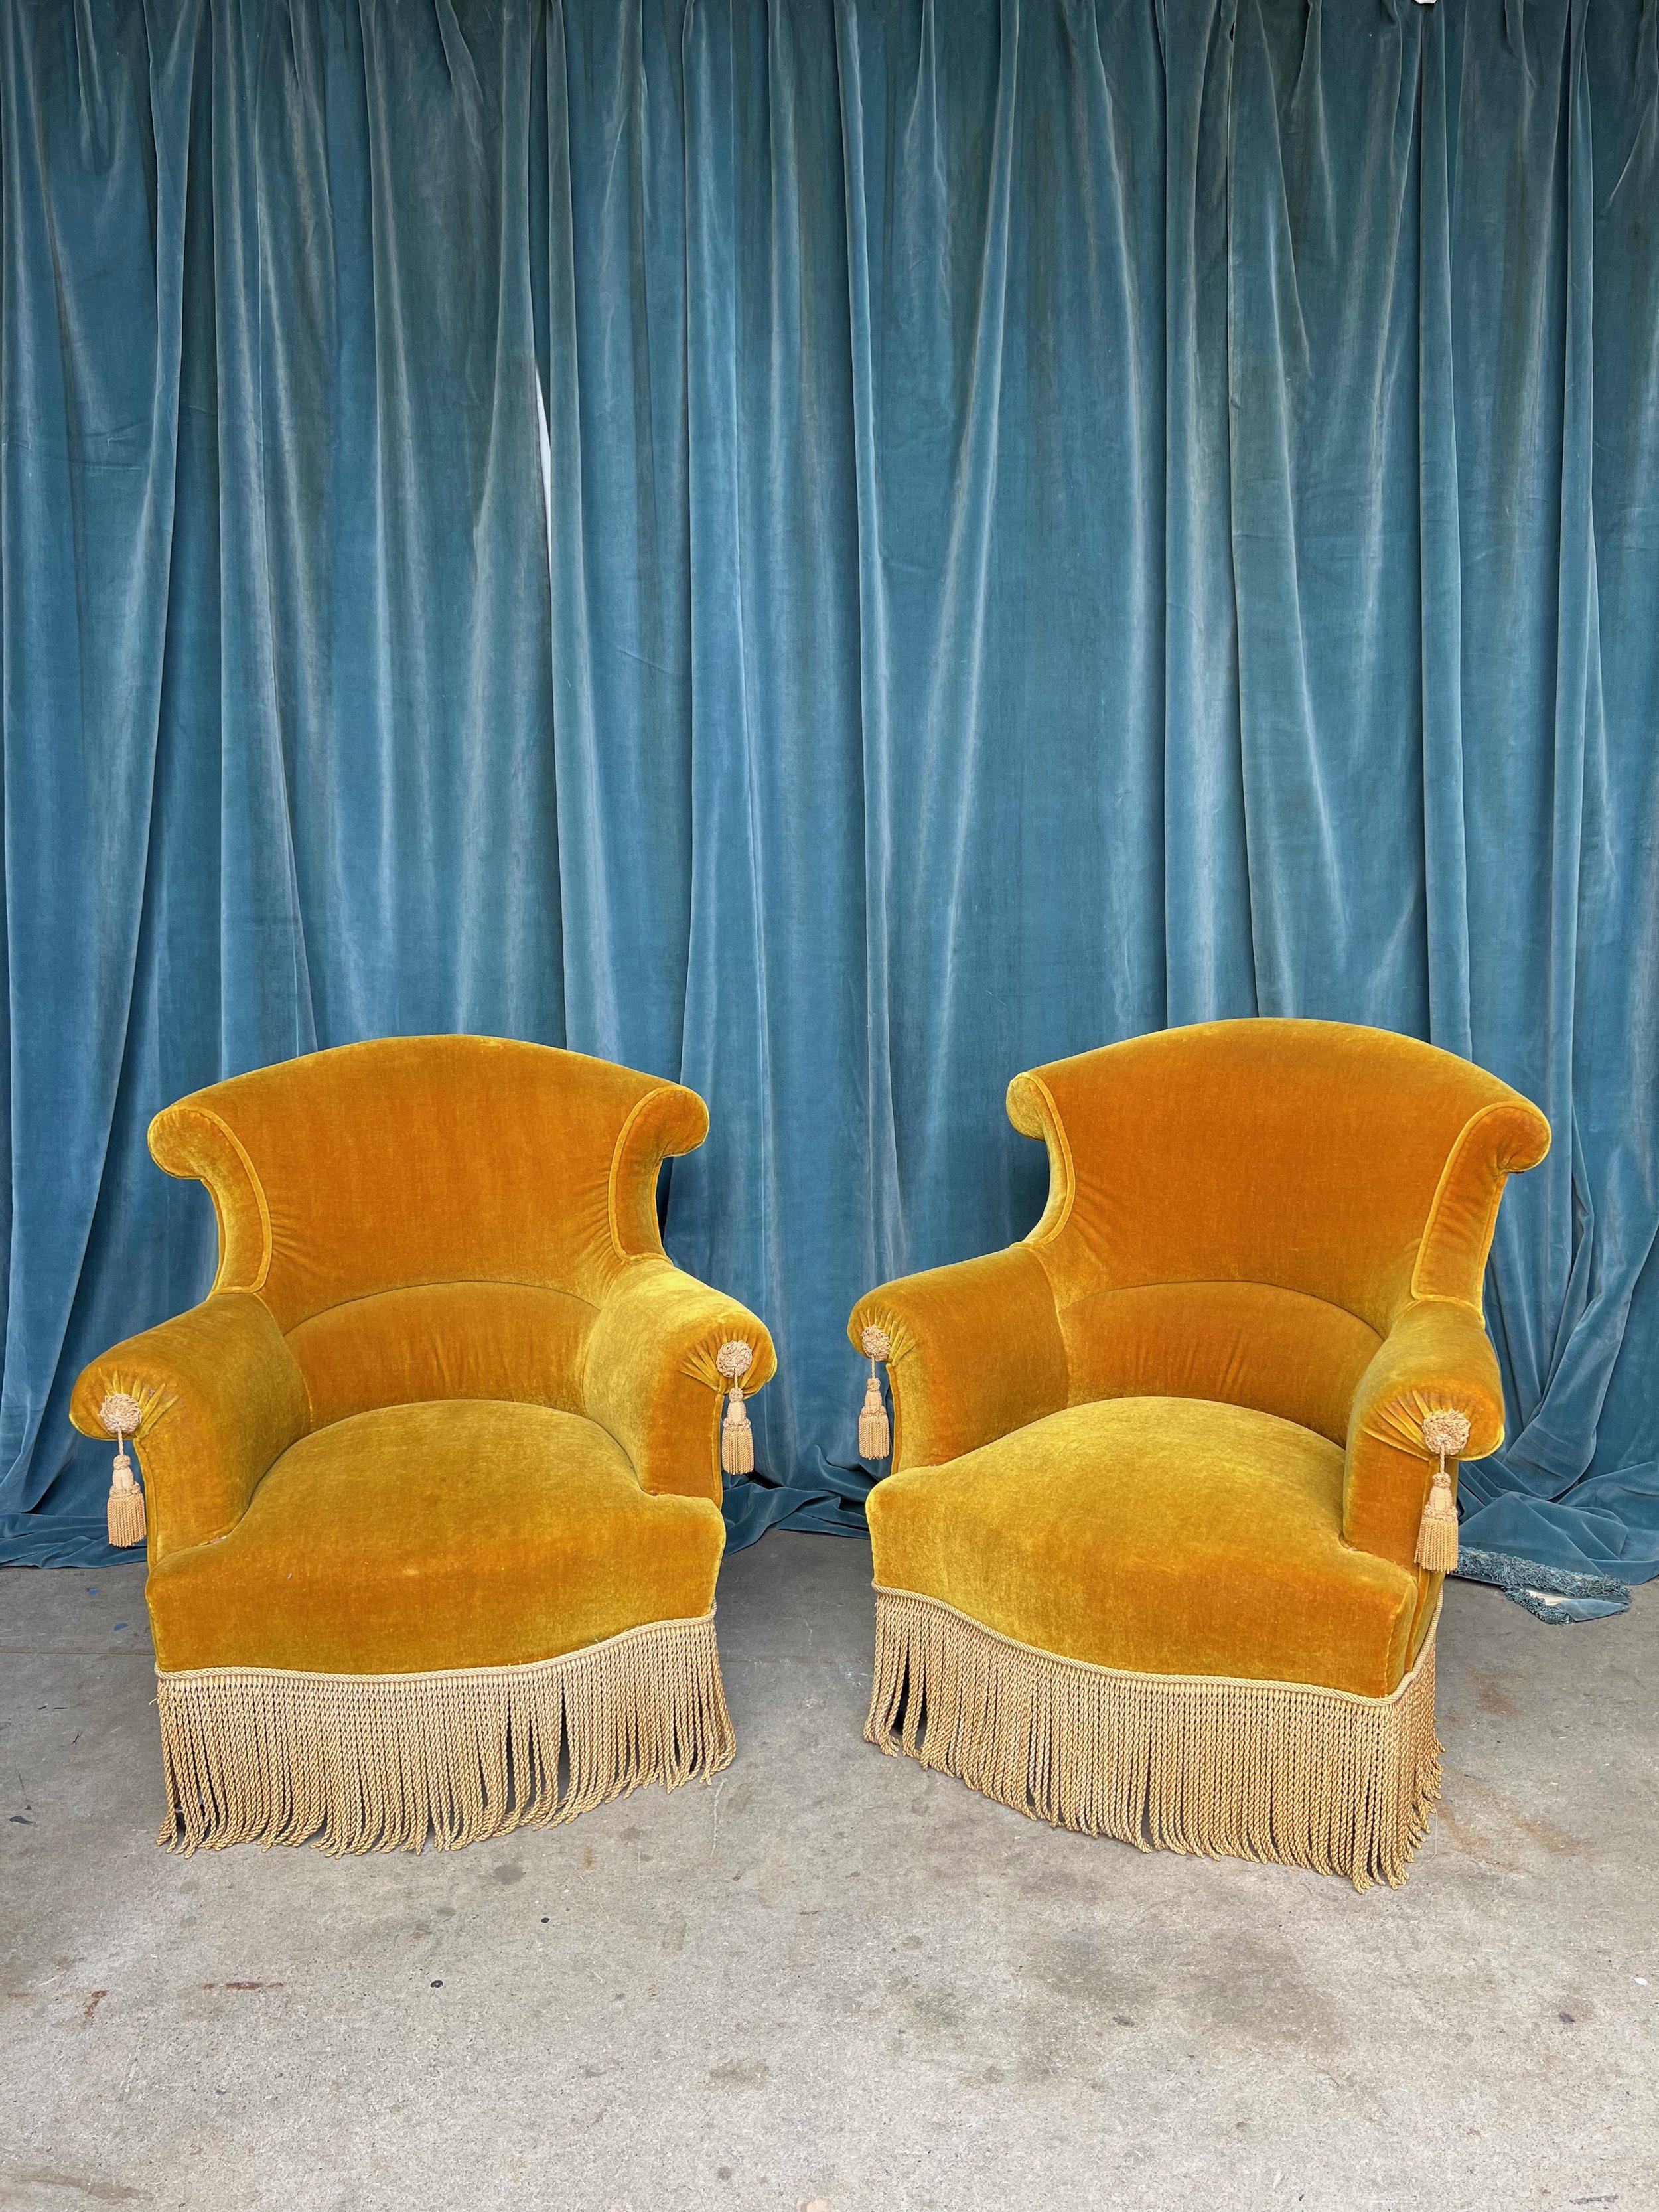 A stunning pair of French Napoleon III armchairs. These French 19th century Napoleon III armchairs are simply beautiful. Upholstered in a rich gold velvet with contrasting bullion fringe and tassels, they are the very definition of luxurious. The